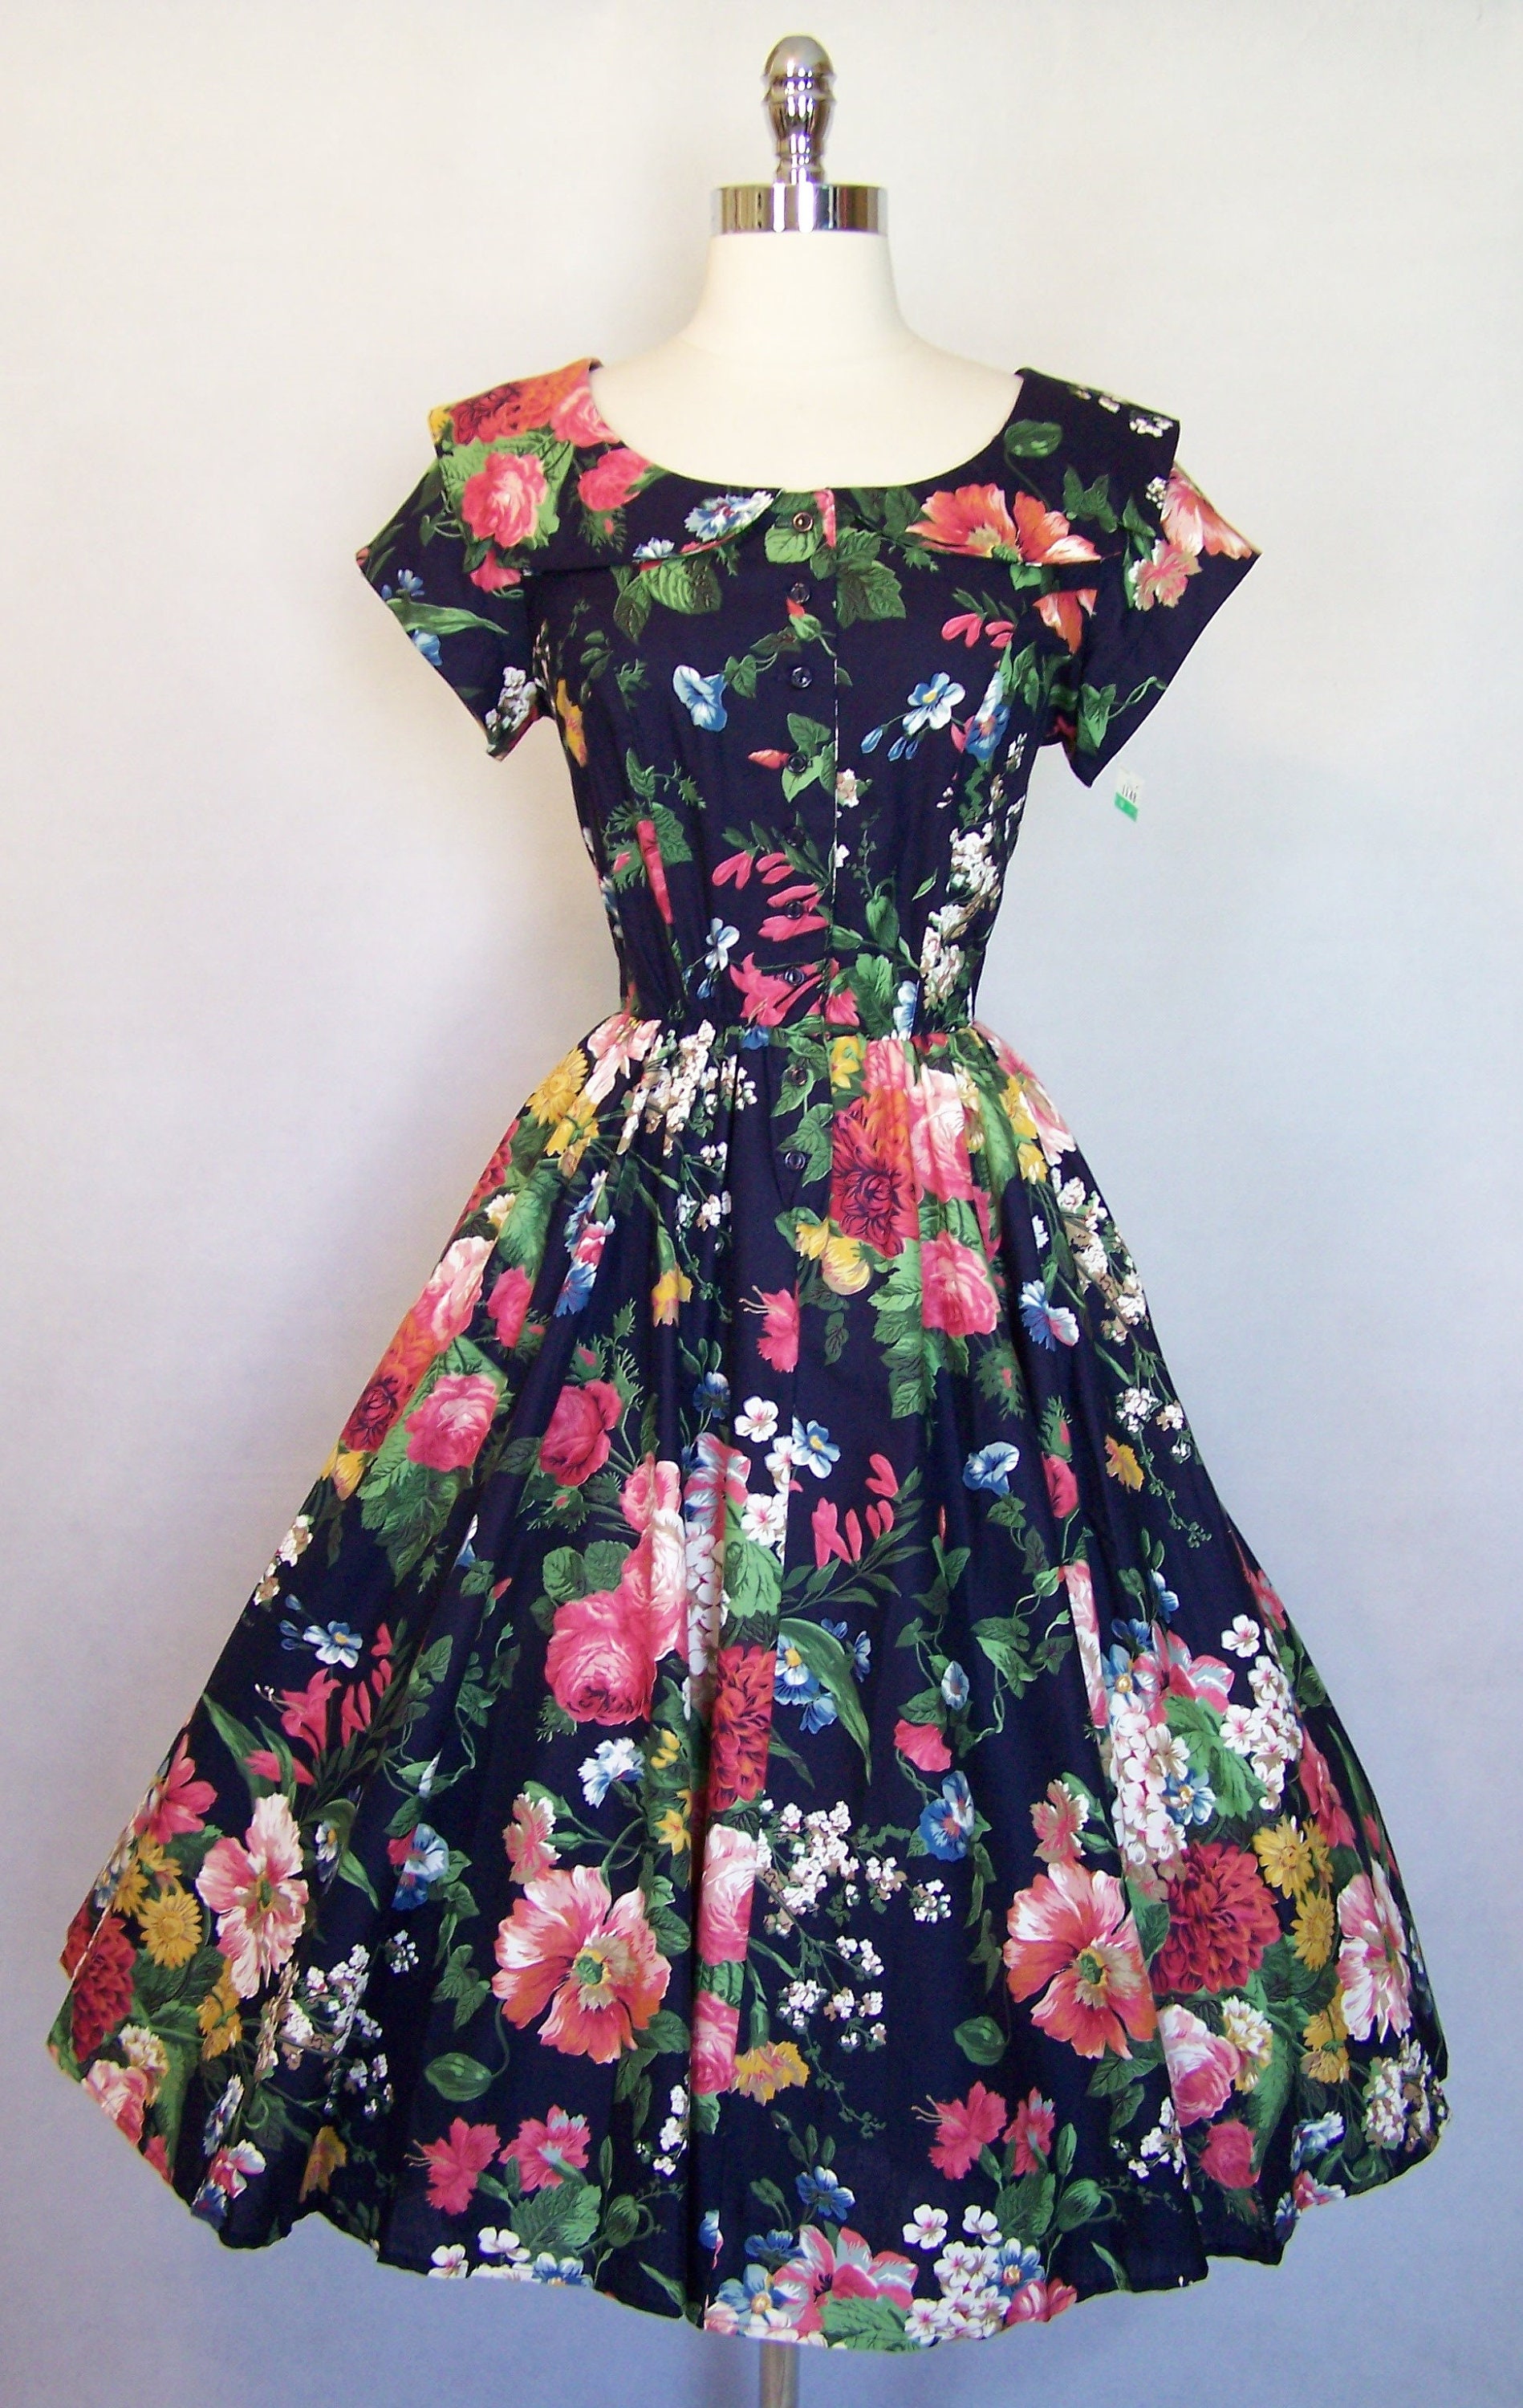 Dress SALE DEADSTOCK 50s Style Navy Floral Fit Flare Cotton - Etsy